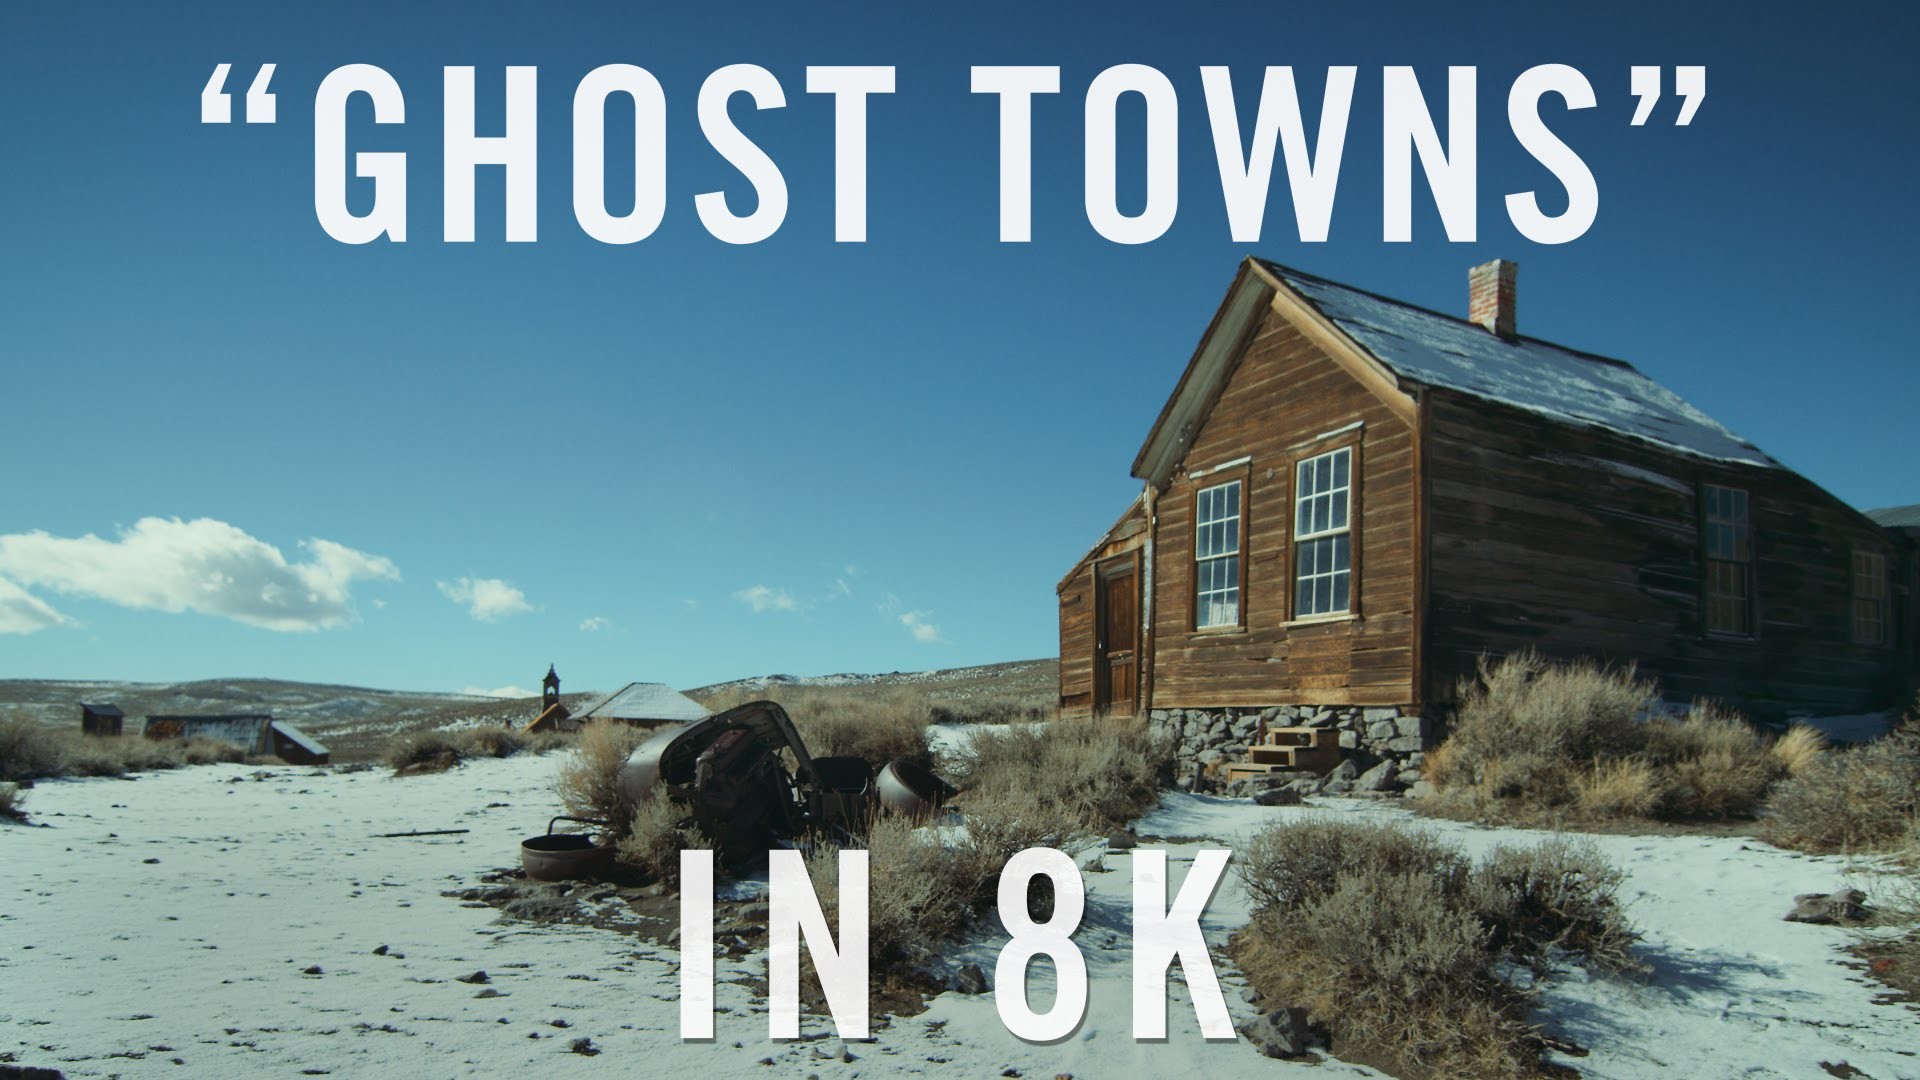 1920x1080 Ghost Town Wallpapers Ghost Town Backgrounds Ghost Town Images | HD  Wallpapers | Pinterest | Ghost towns, Hd wallpaper and Wallpaper